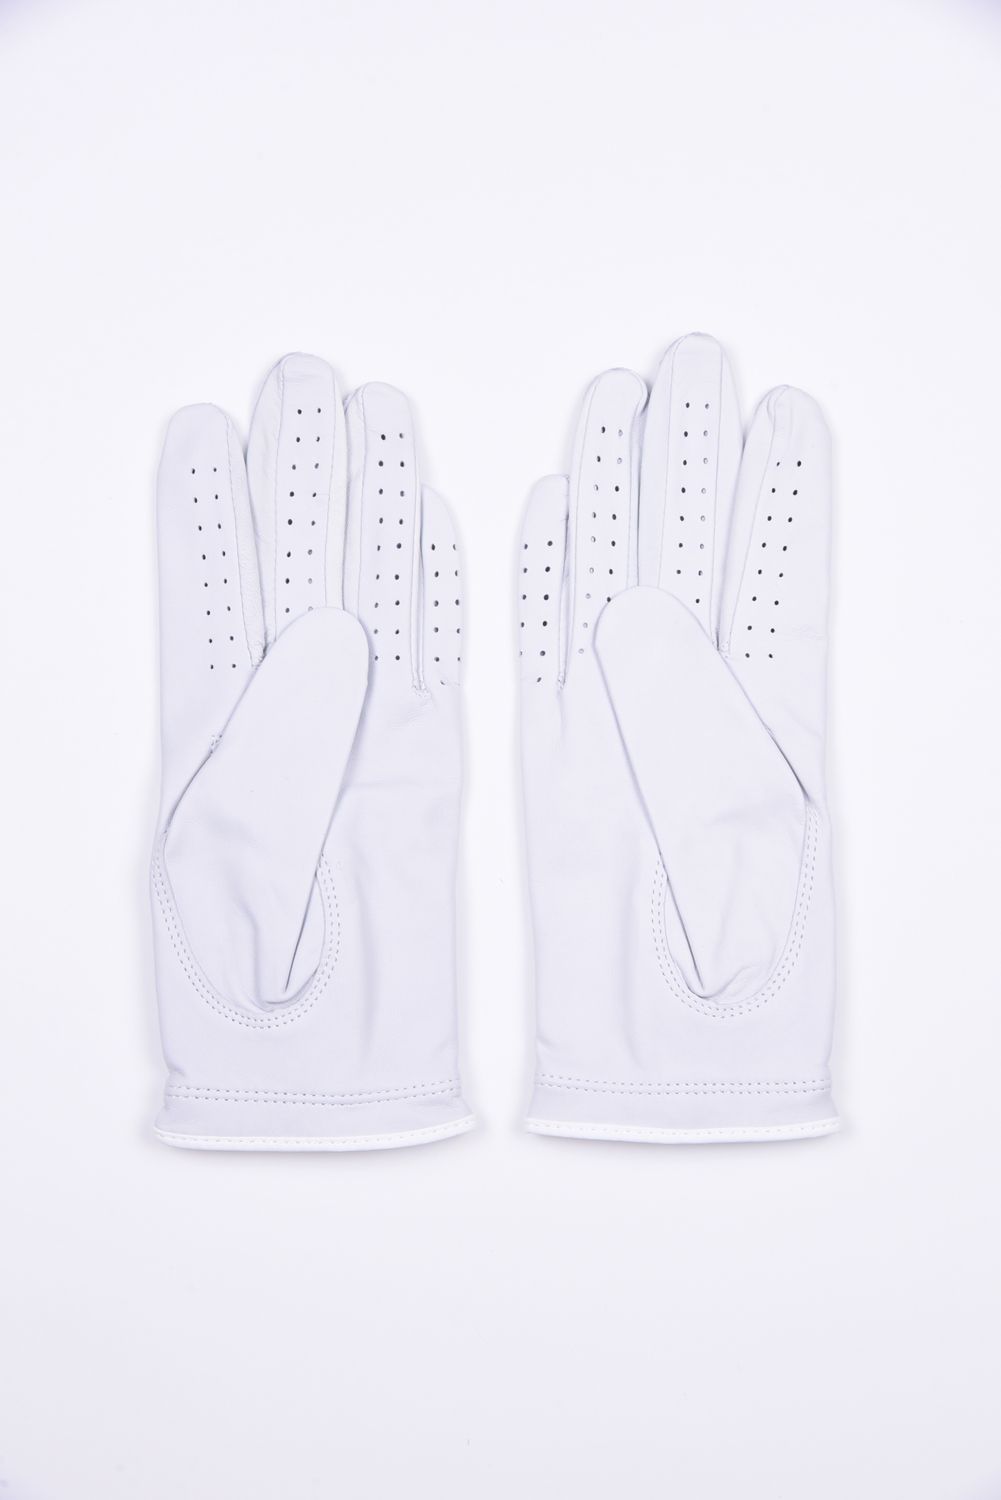 G/FORE - WOMENS ESSENTIAL GLOVE (LEFT&RIGHTセット) / アイコンロゴ